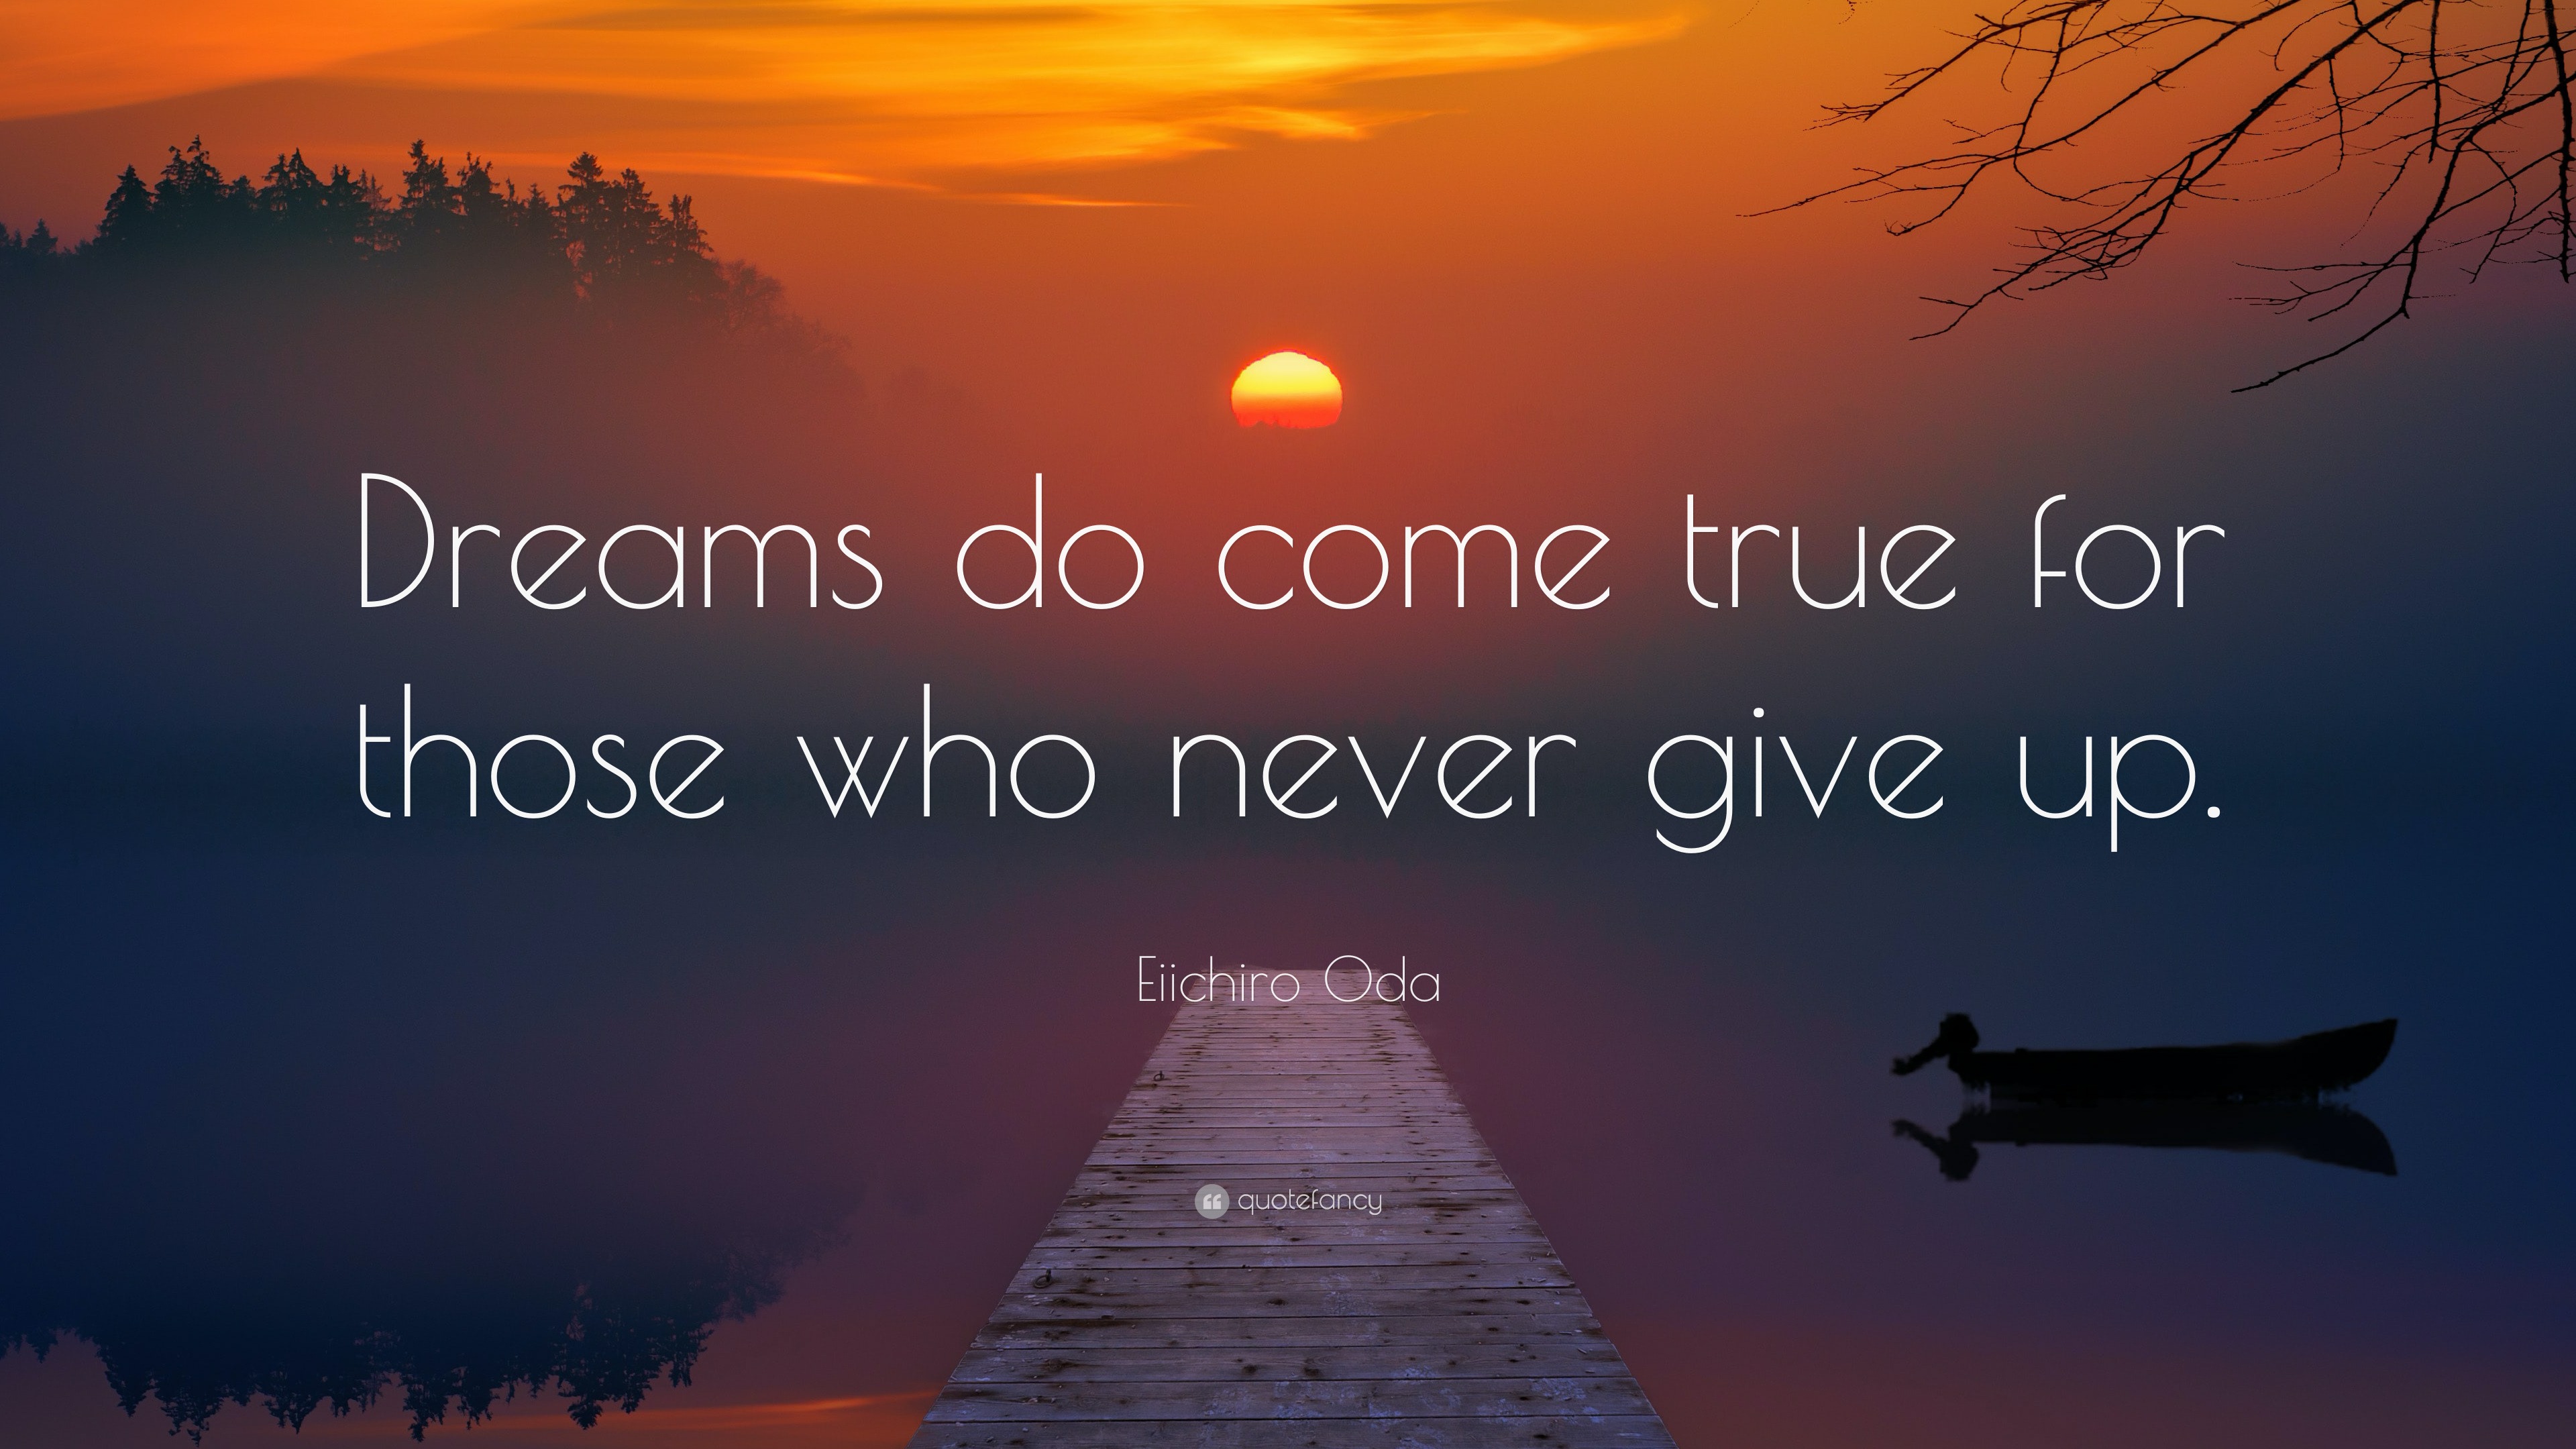 Eiichiro Oda Quote “dreams Do Come True For Those Who Never Give Up”